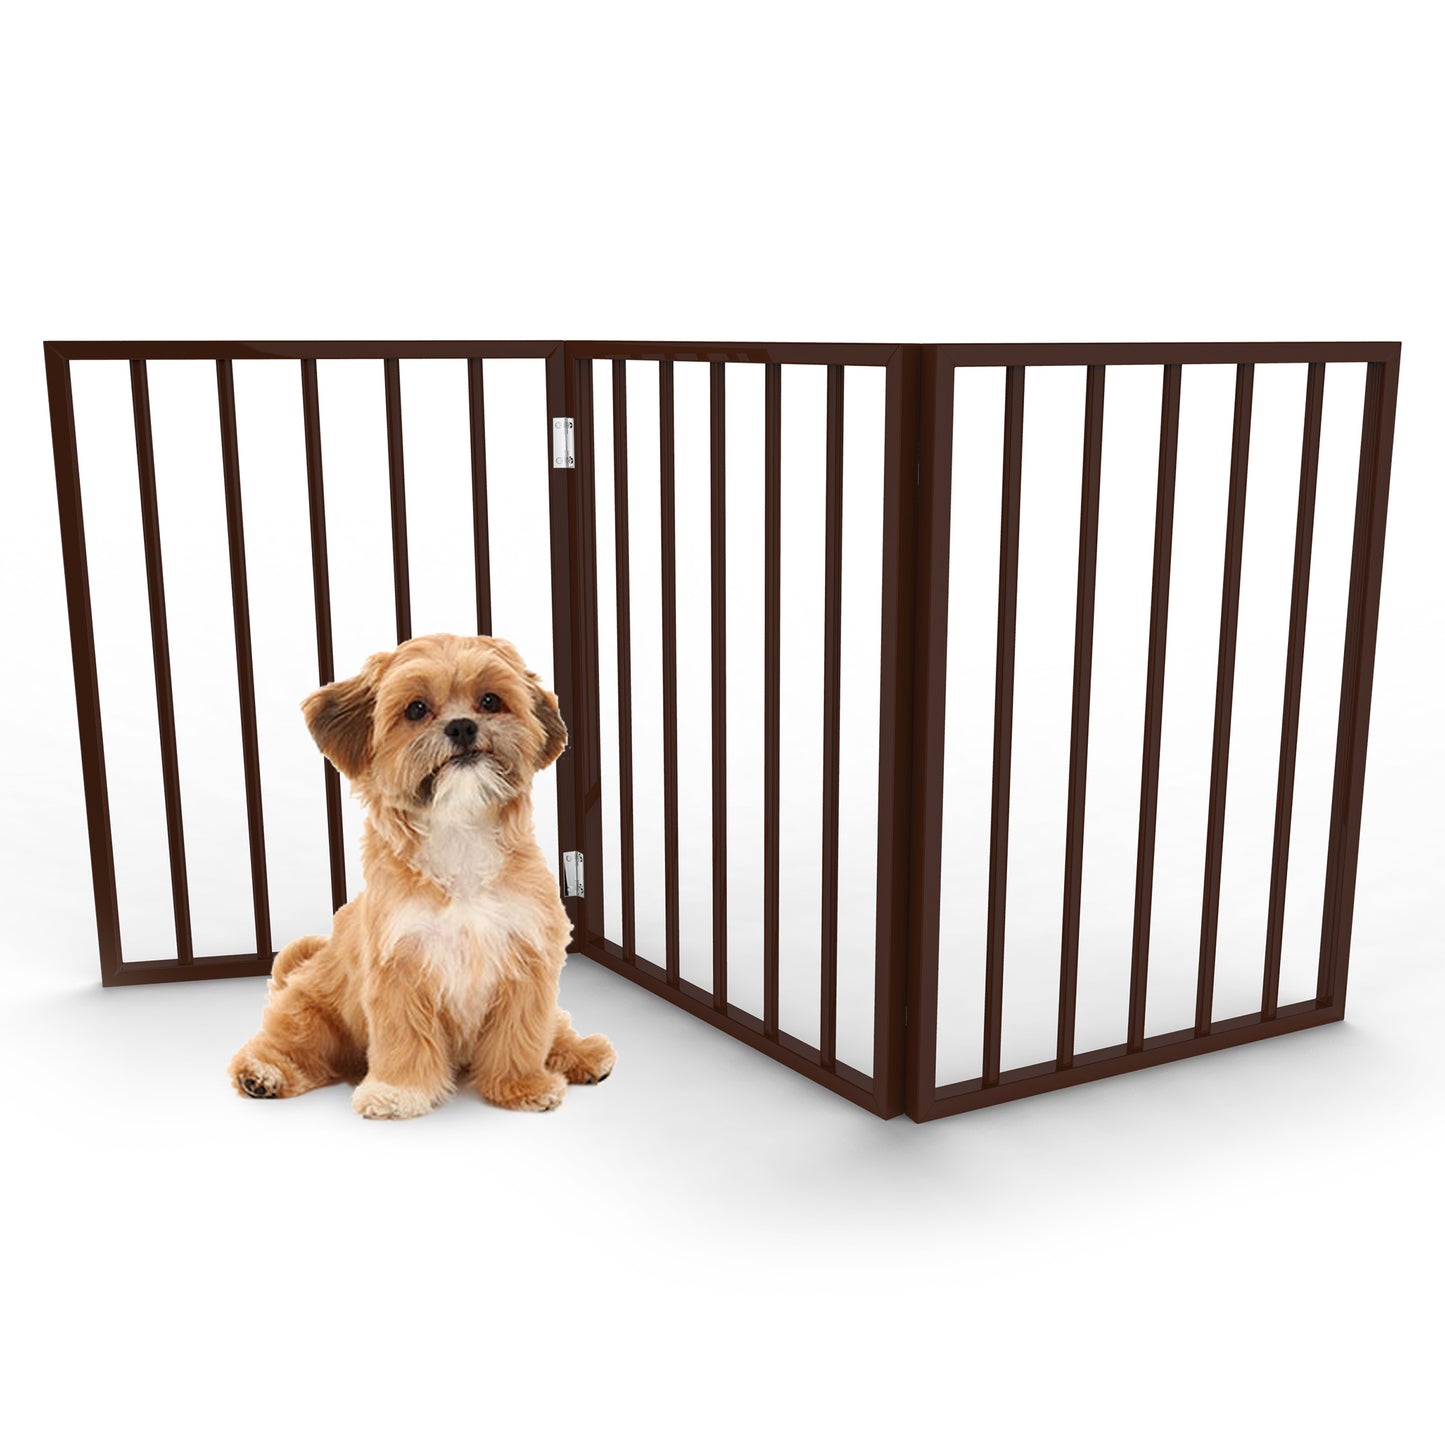 A cute puppy dog obediently and patiently sits outside of a 3 panel brown gate awaiting commands from an owner.